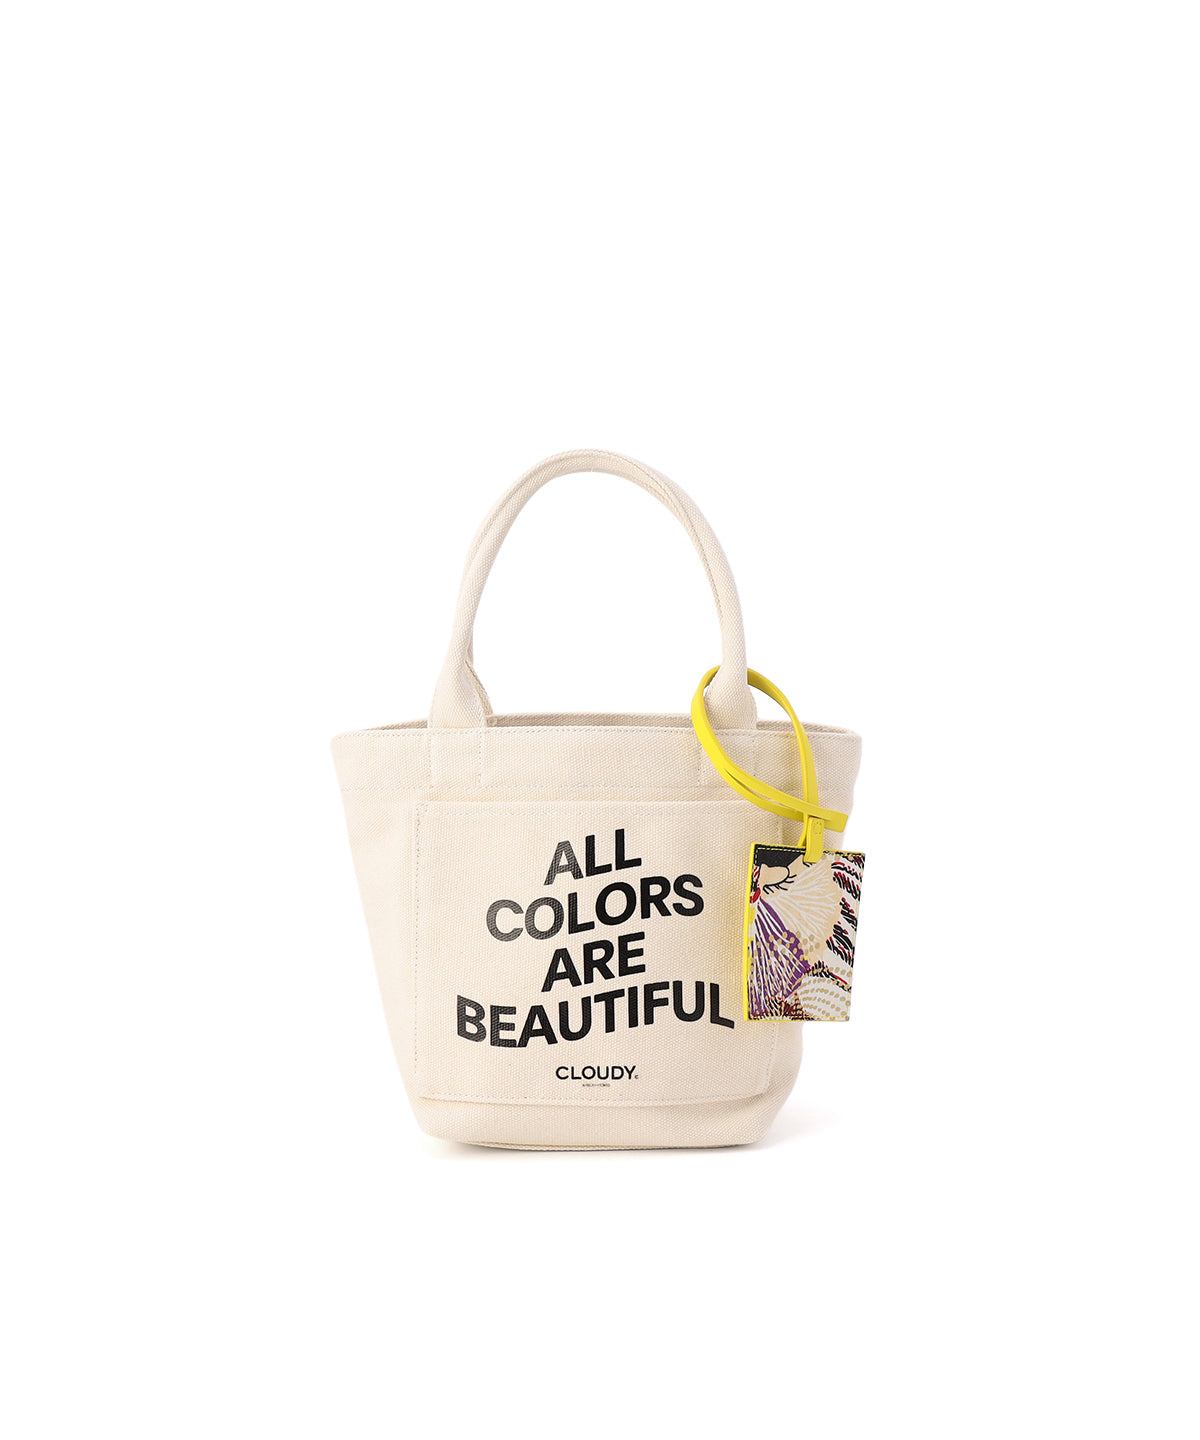 Recycled Canvas Tote Bag(Small )NATURAL